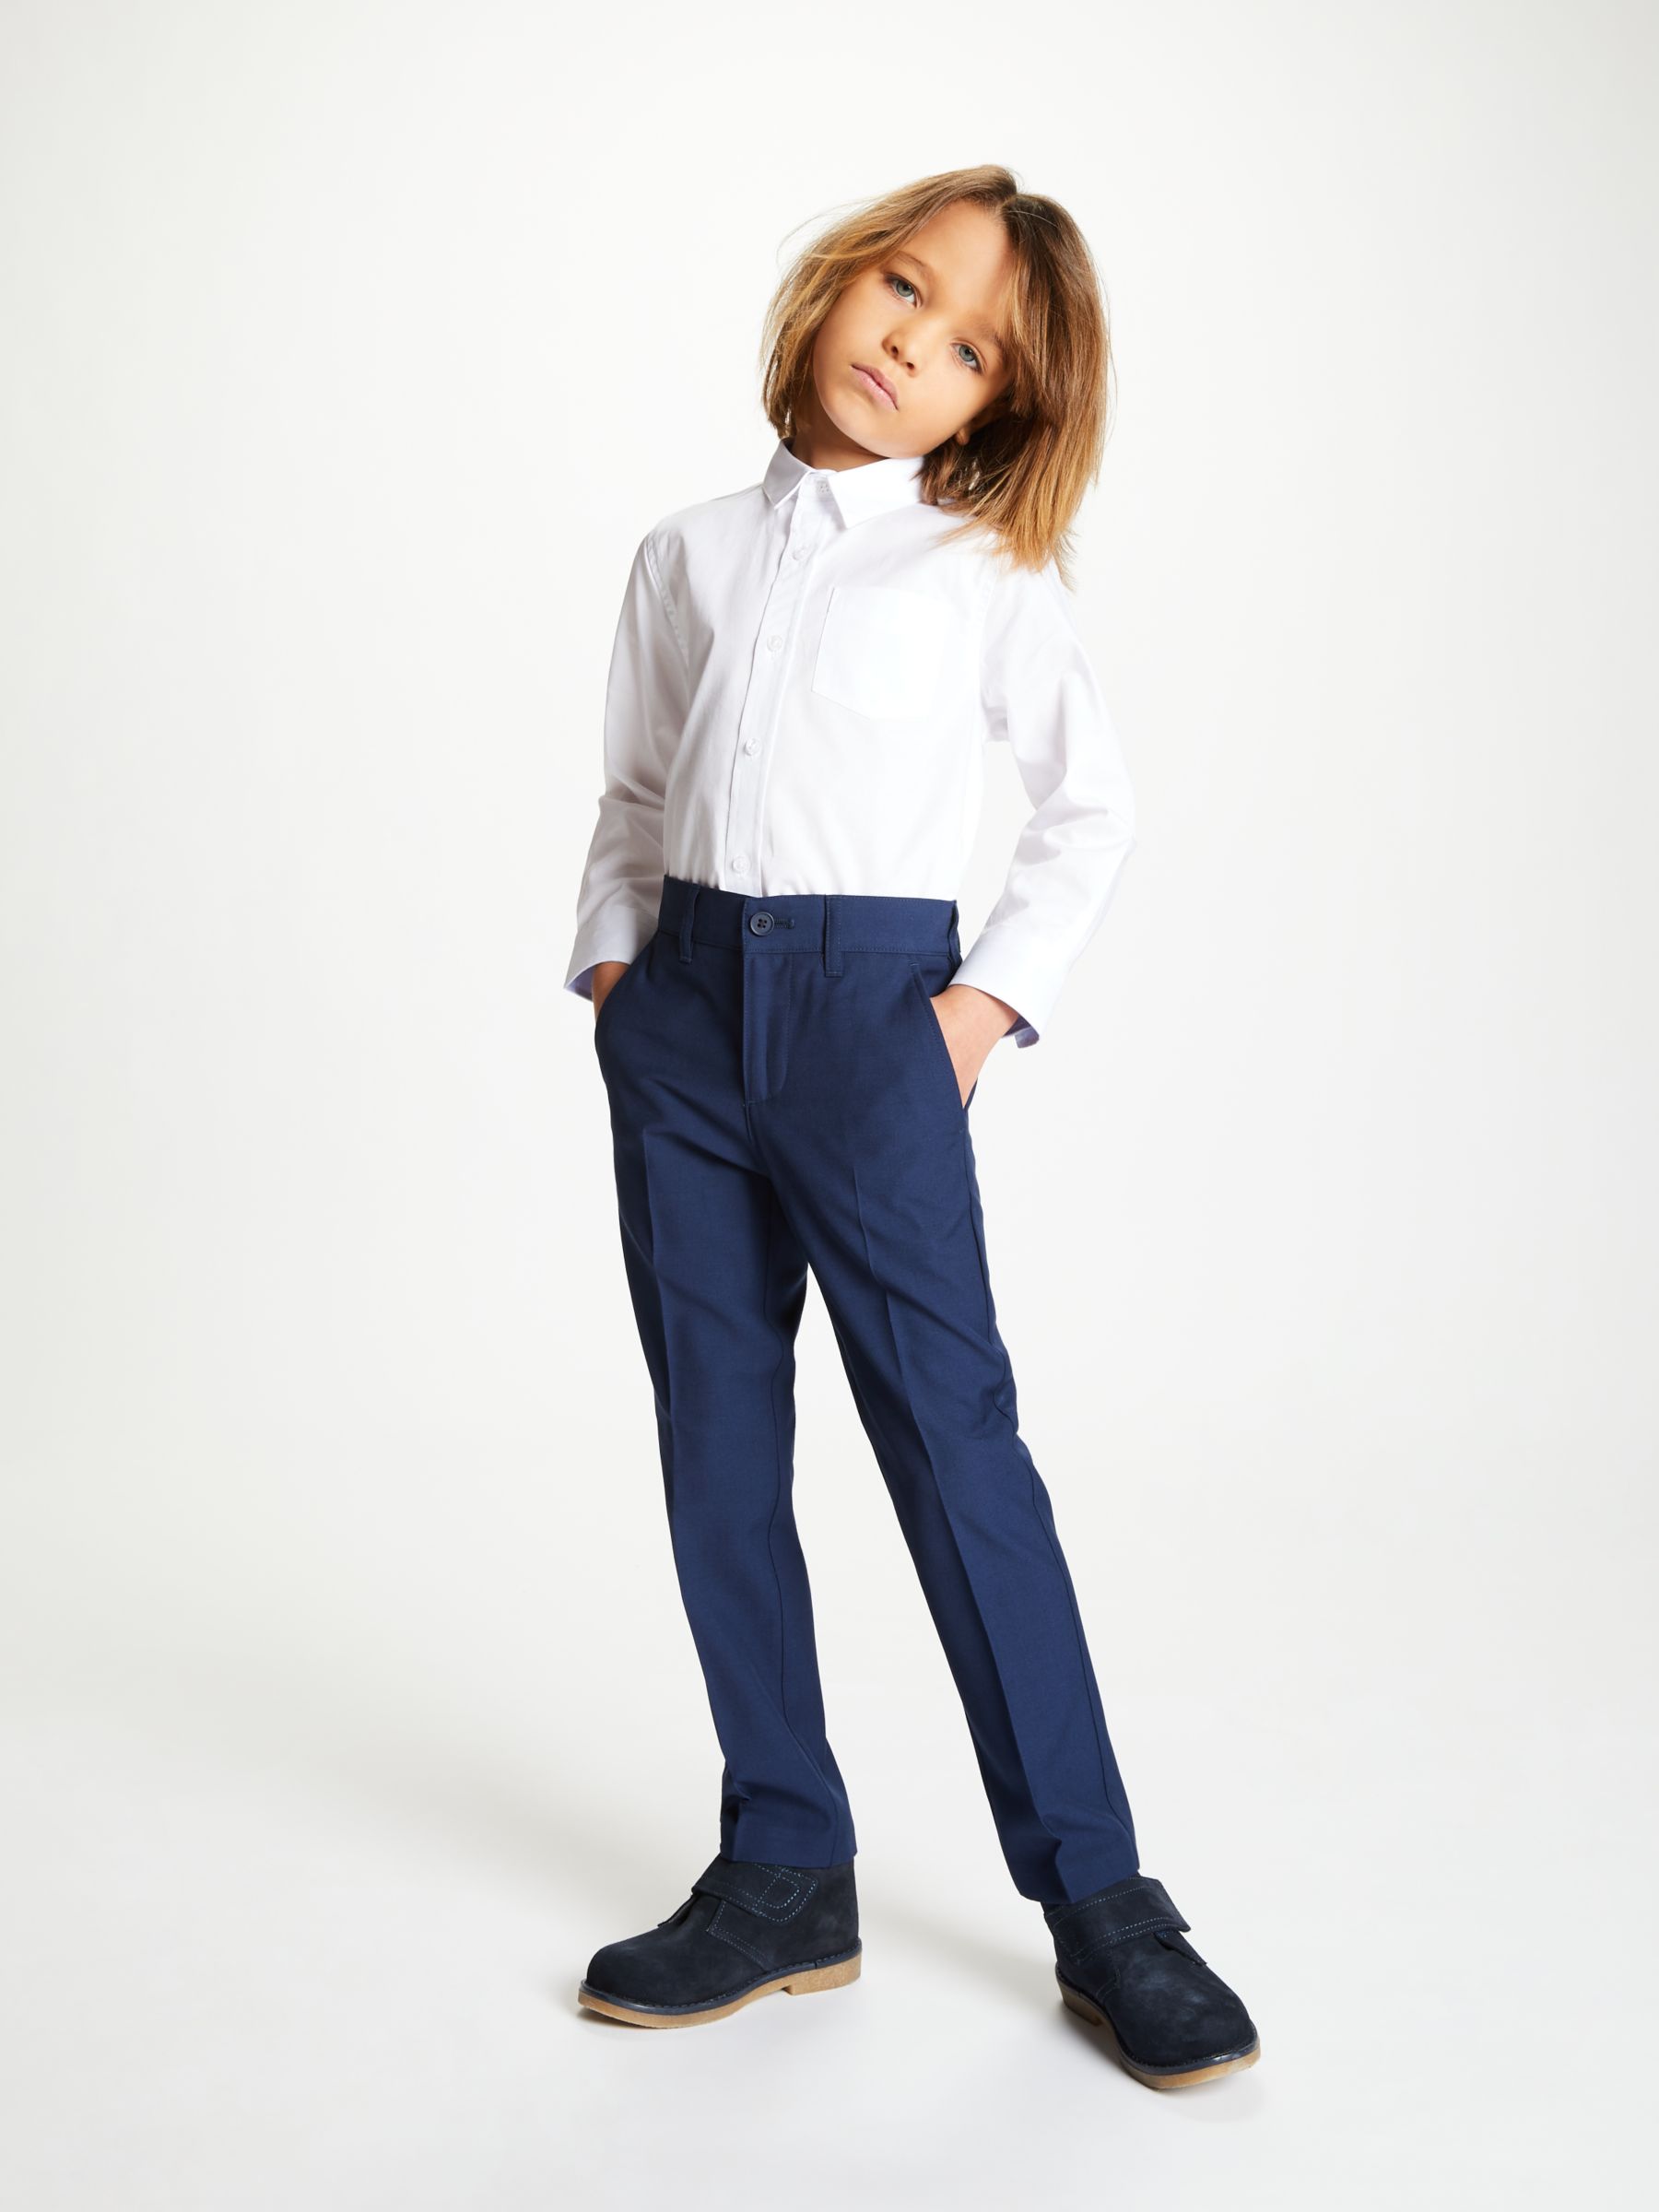 Image of John Lewis and Partners Heirloom Collection Boys Plain Textured Herringbone Shirt White